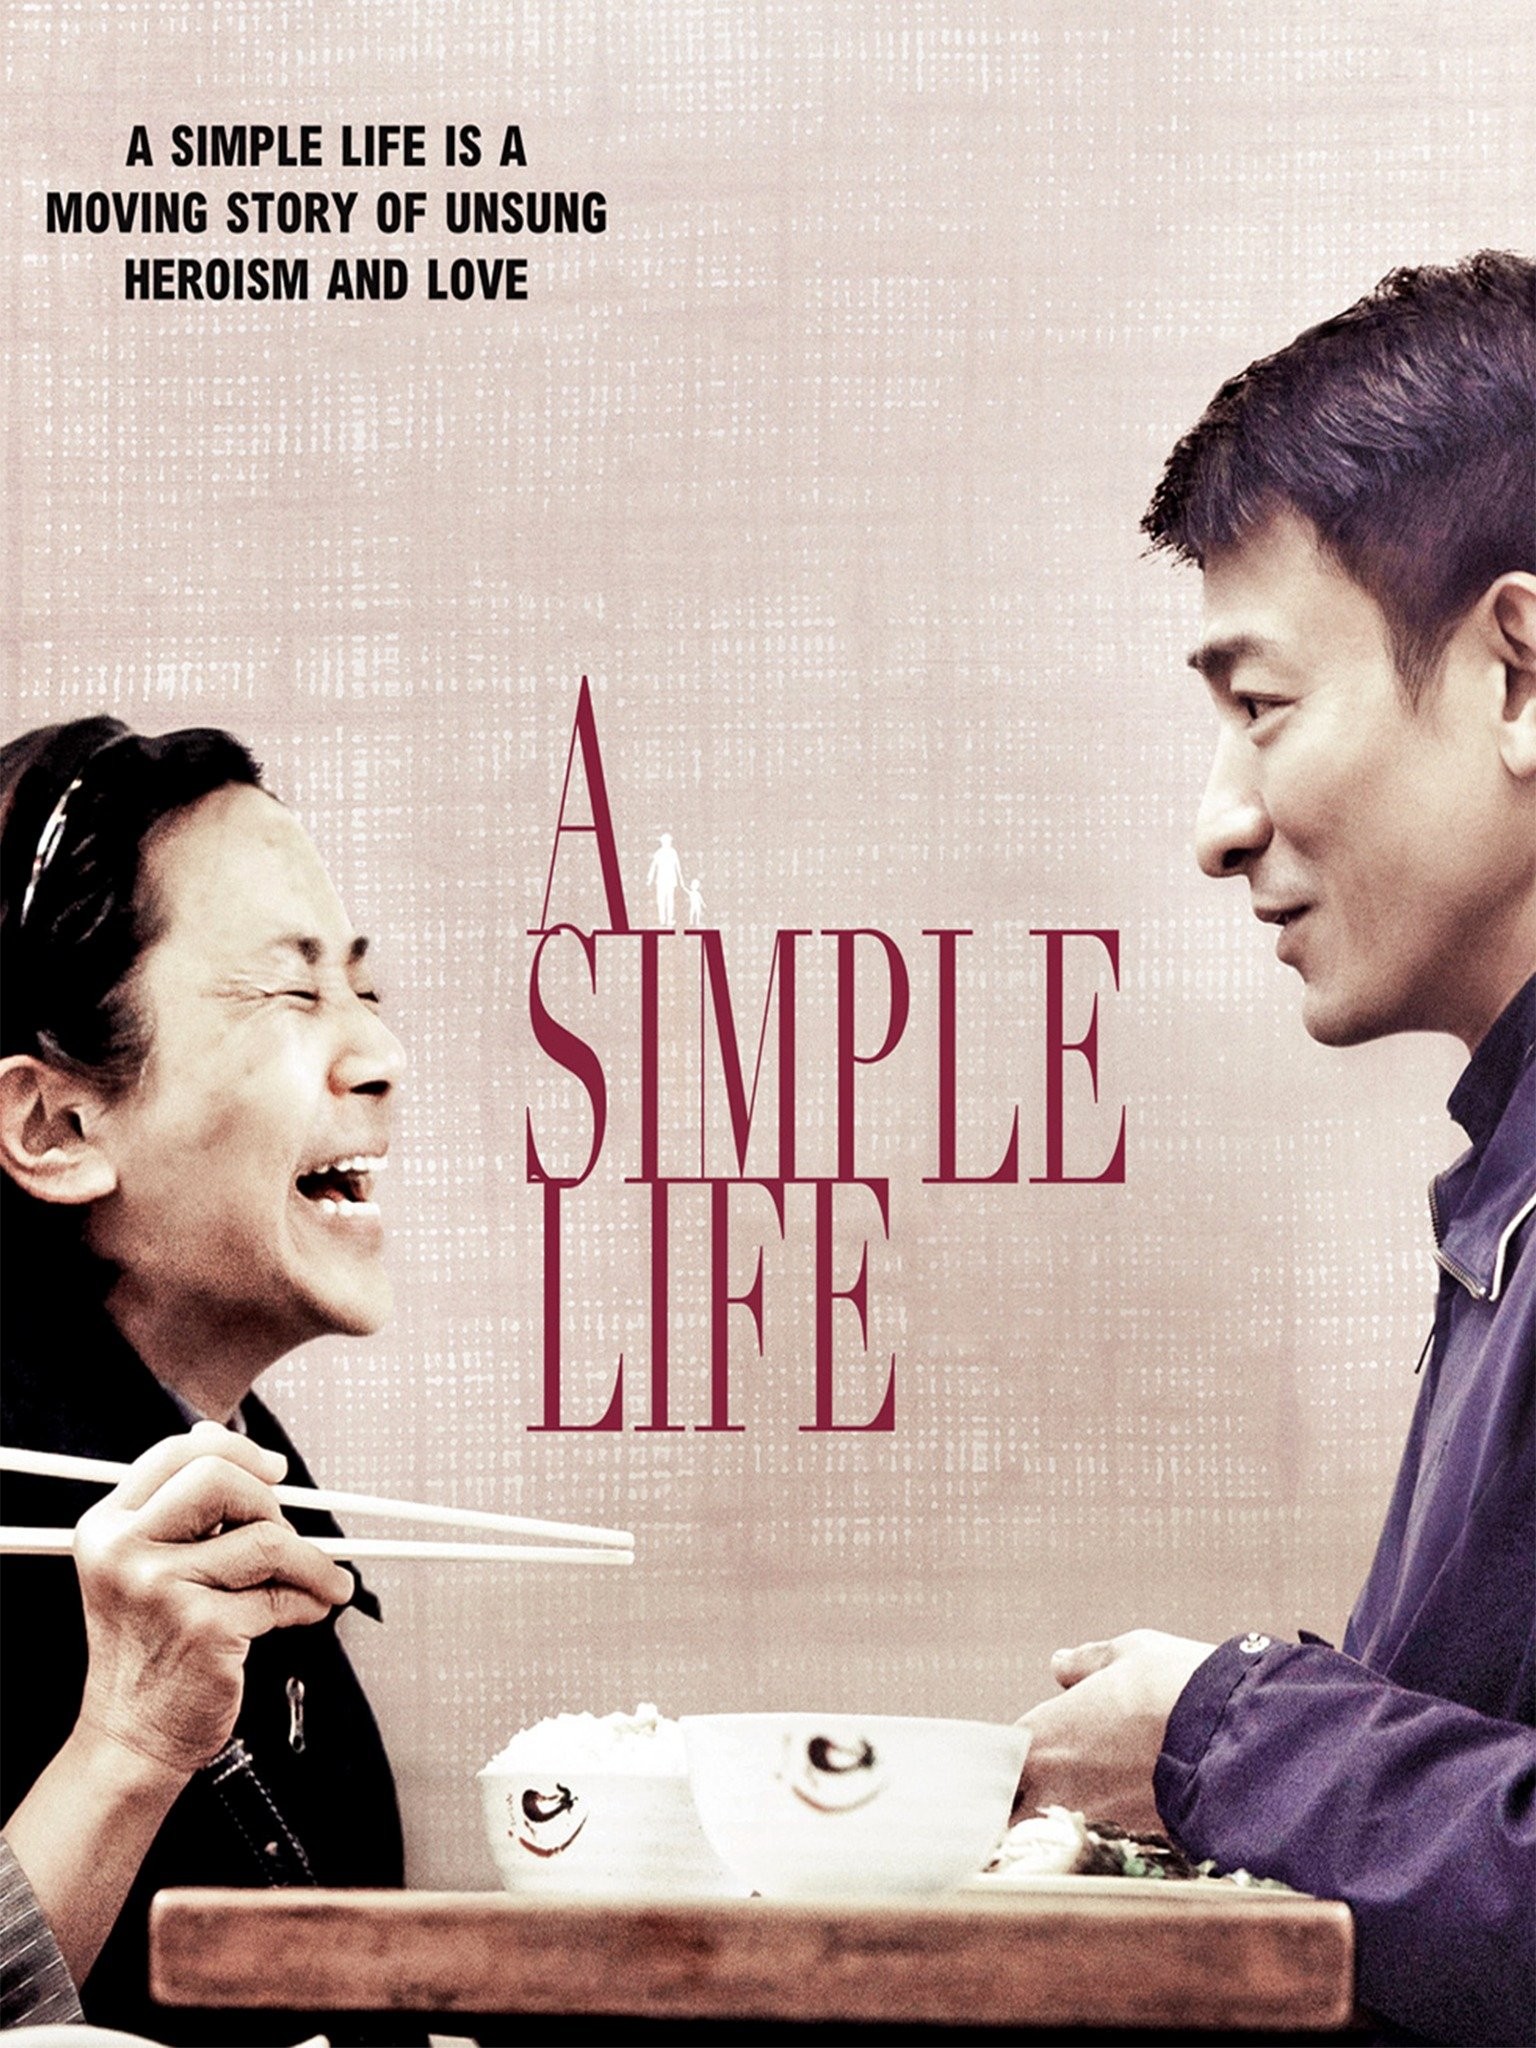 The Simple Life - Rotten Tomatoes